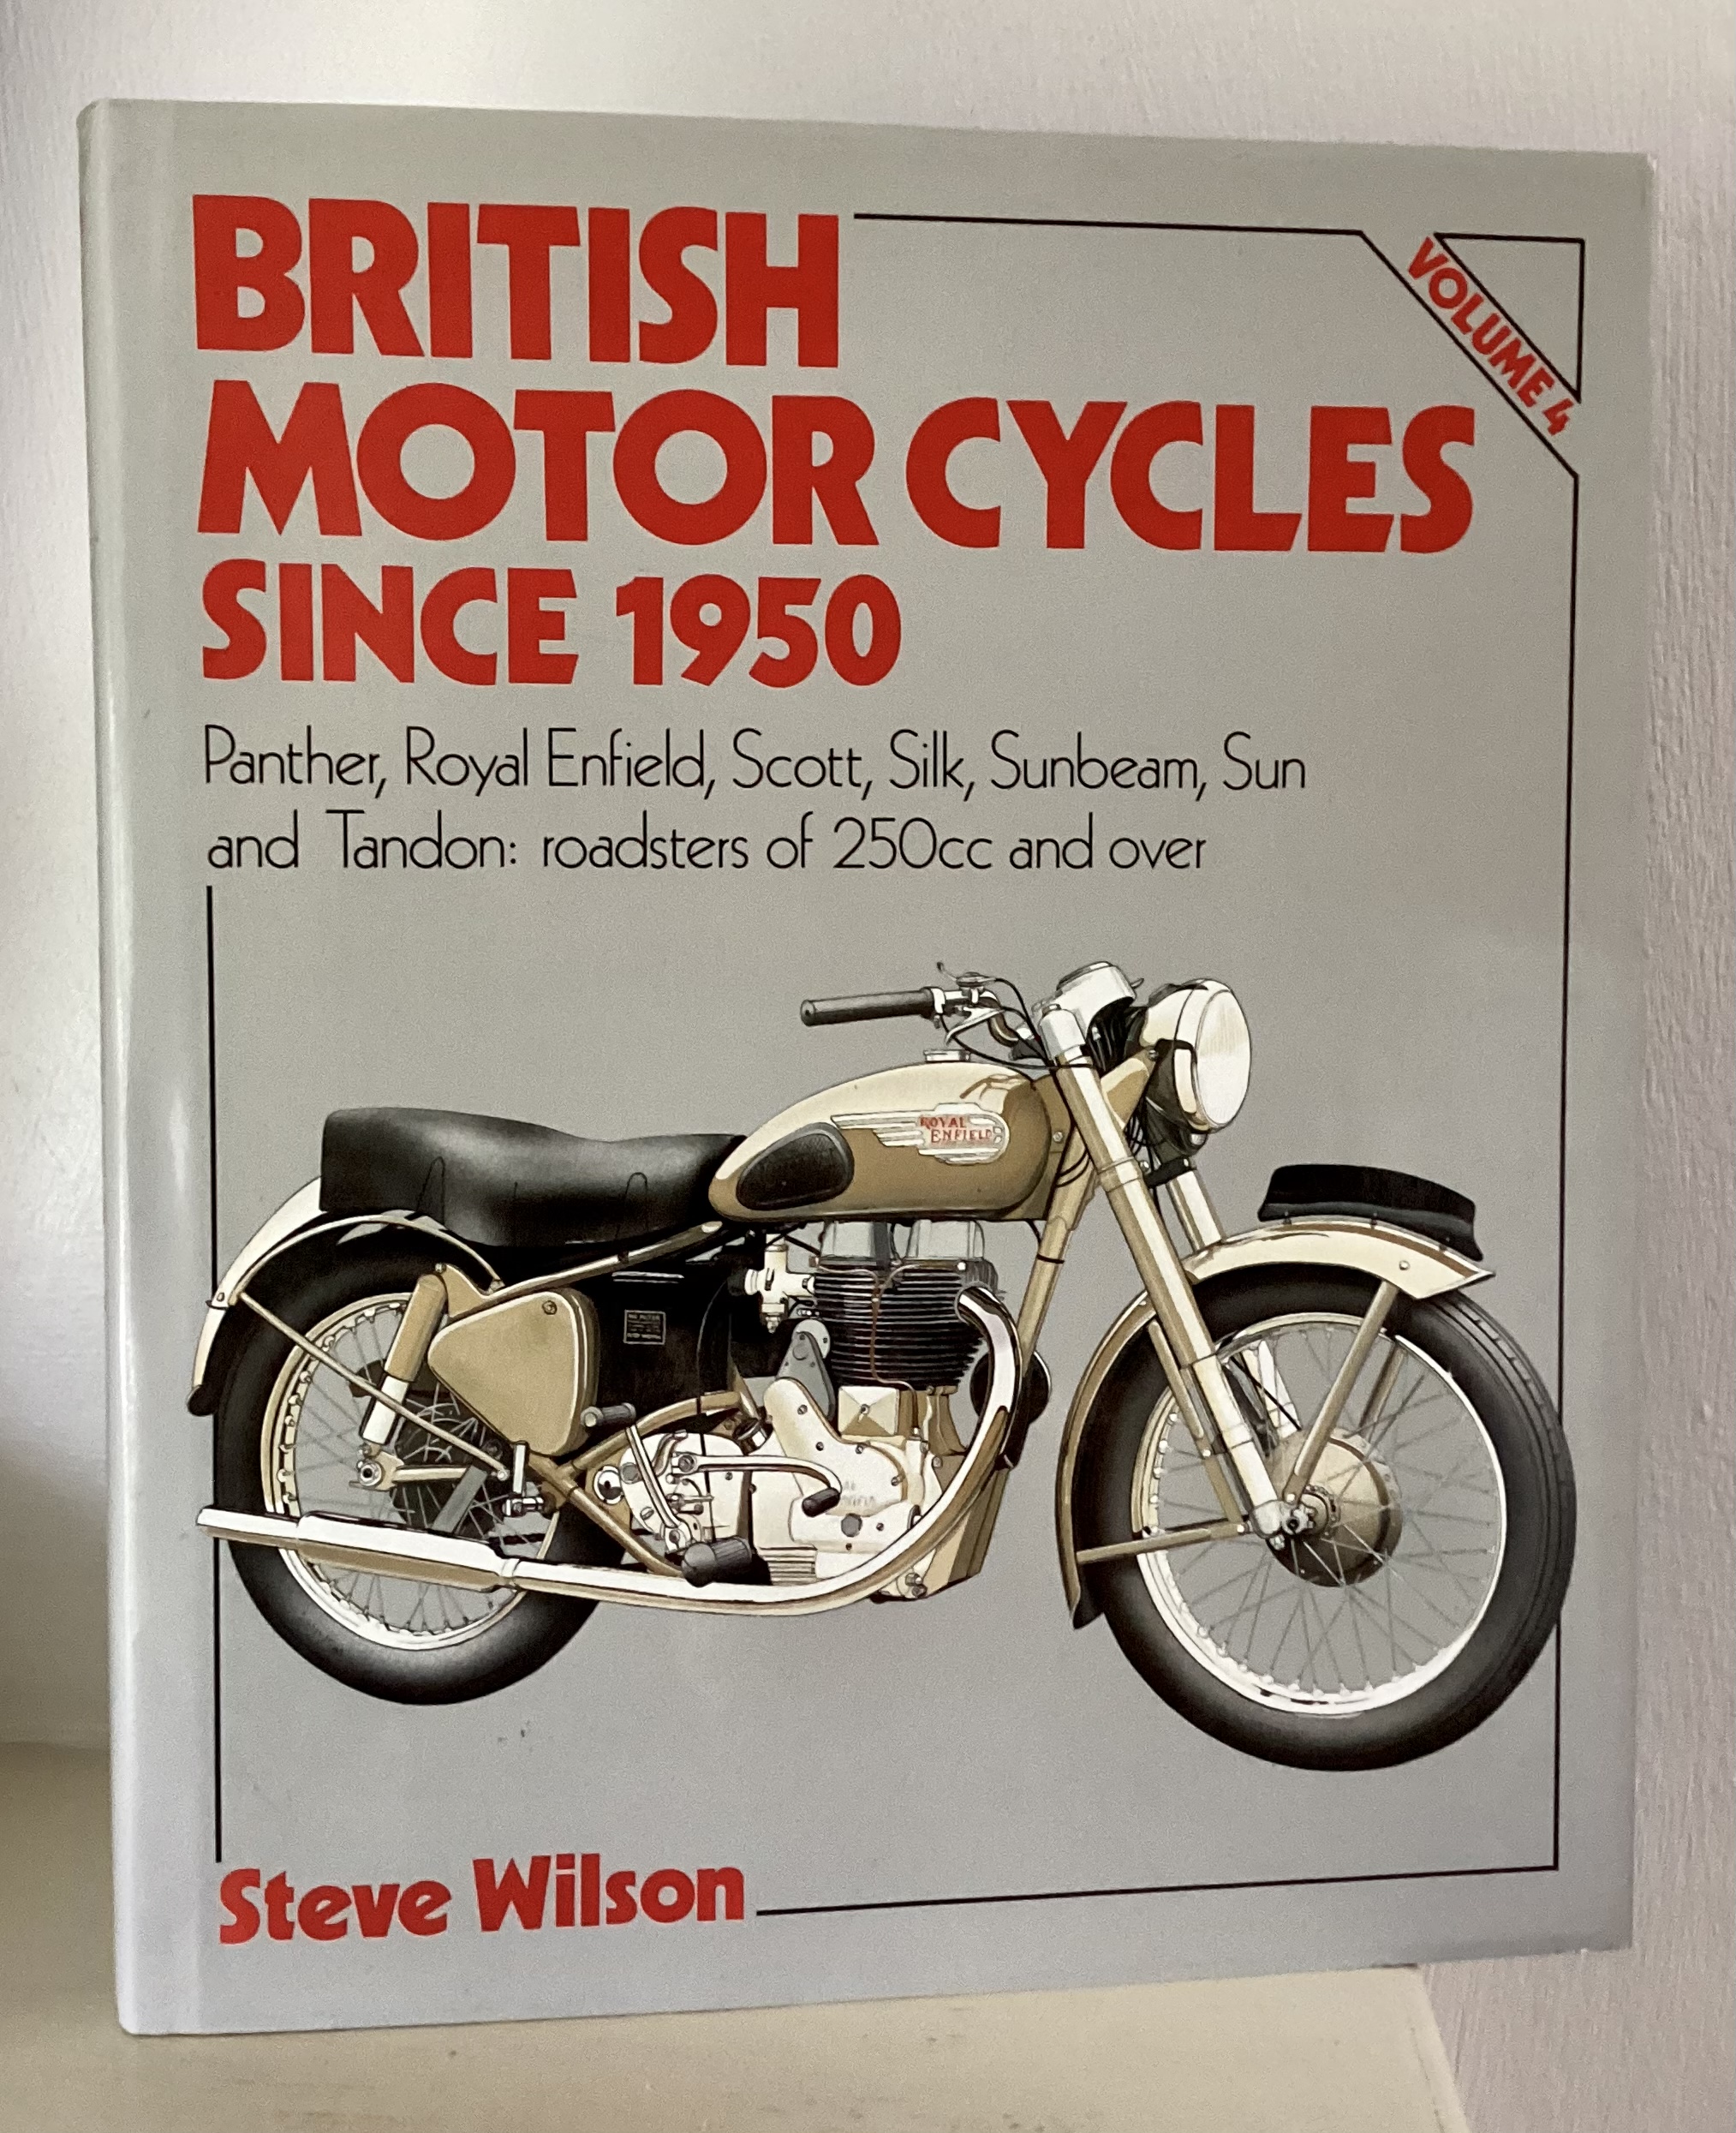 Panther, Royal Enfield, Scott, Silk, Sunbeam, Sun and Tandon Roadsters of 250c.c (v. 4): Panther, Royal Enfield, Scott, Silk, Sunbeam, Sun and Tandon . and over (British Motor Cycles Since 1950) - Wilson, Steve